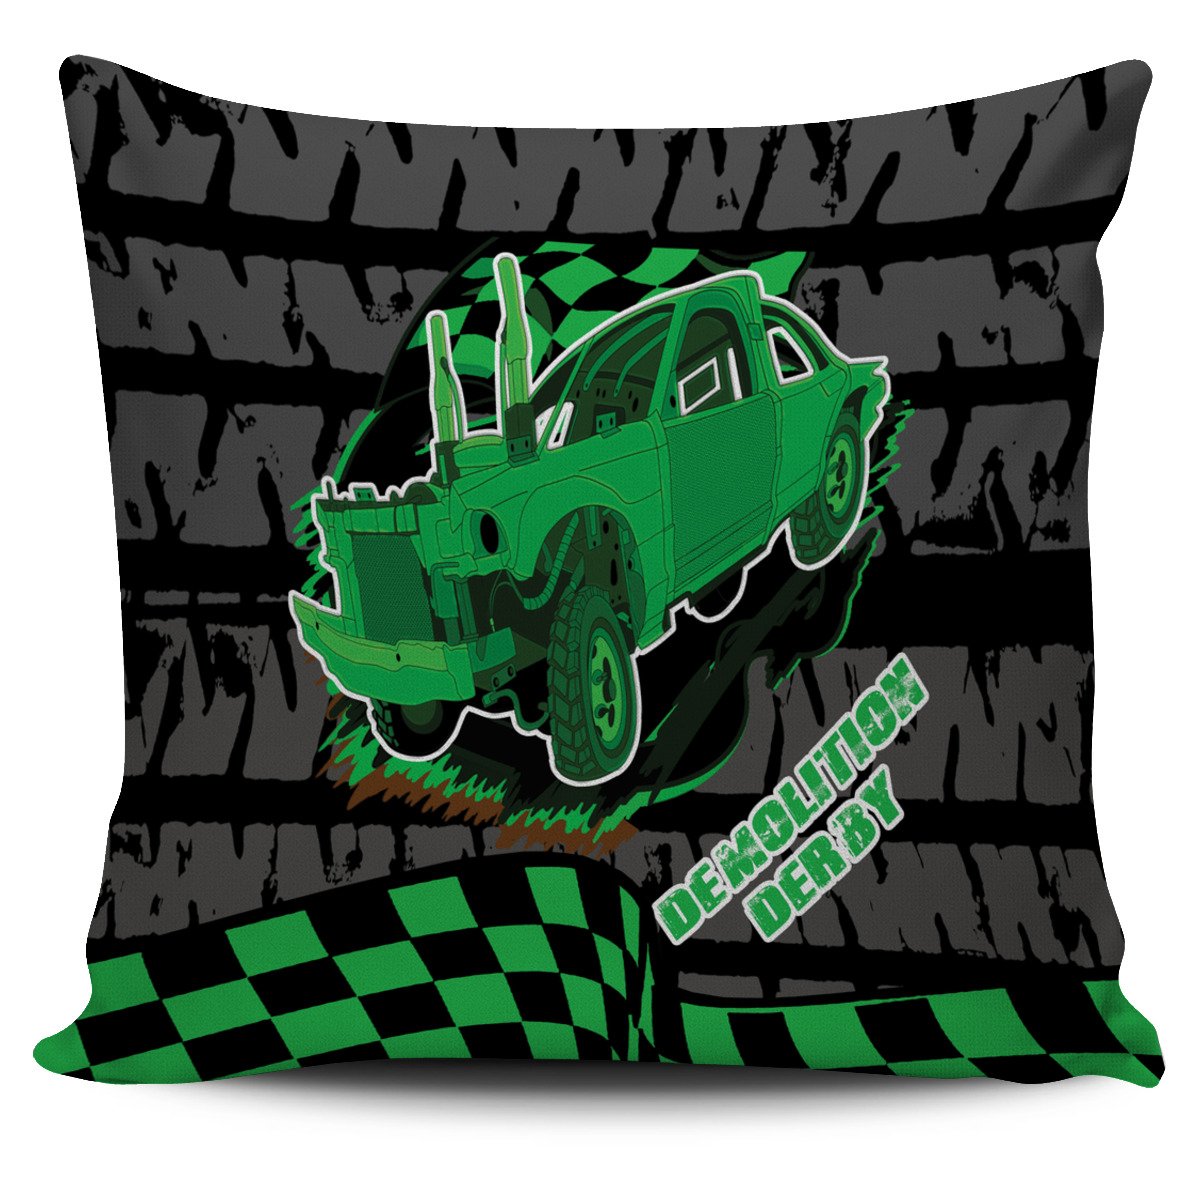 demolition derby pillow covers